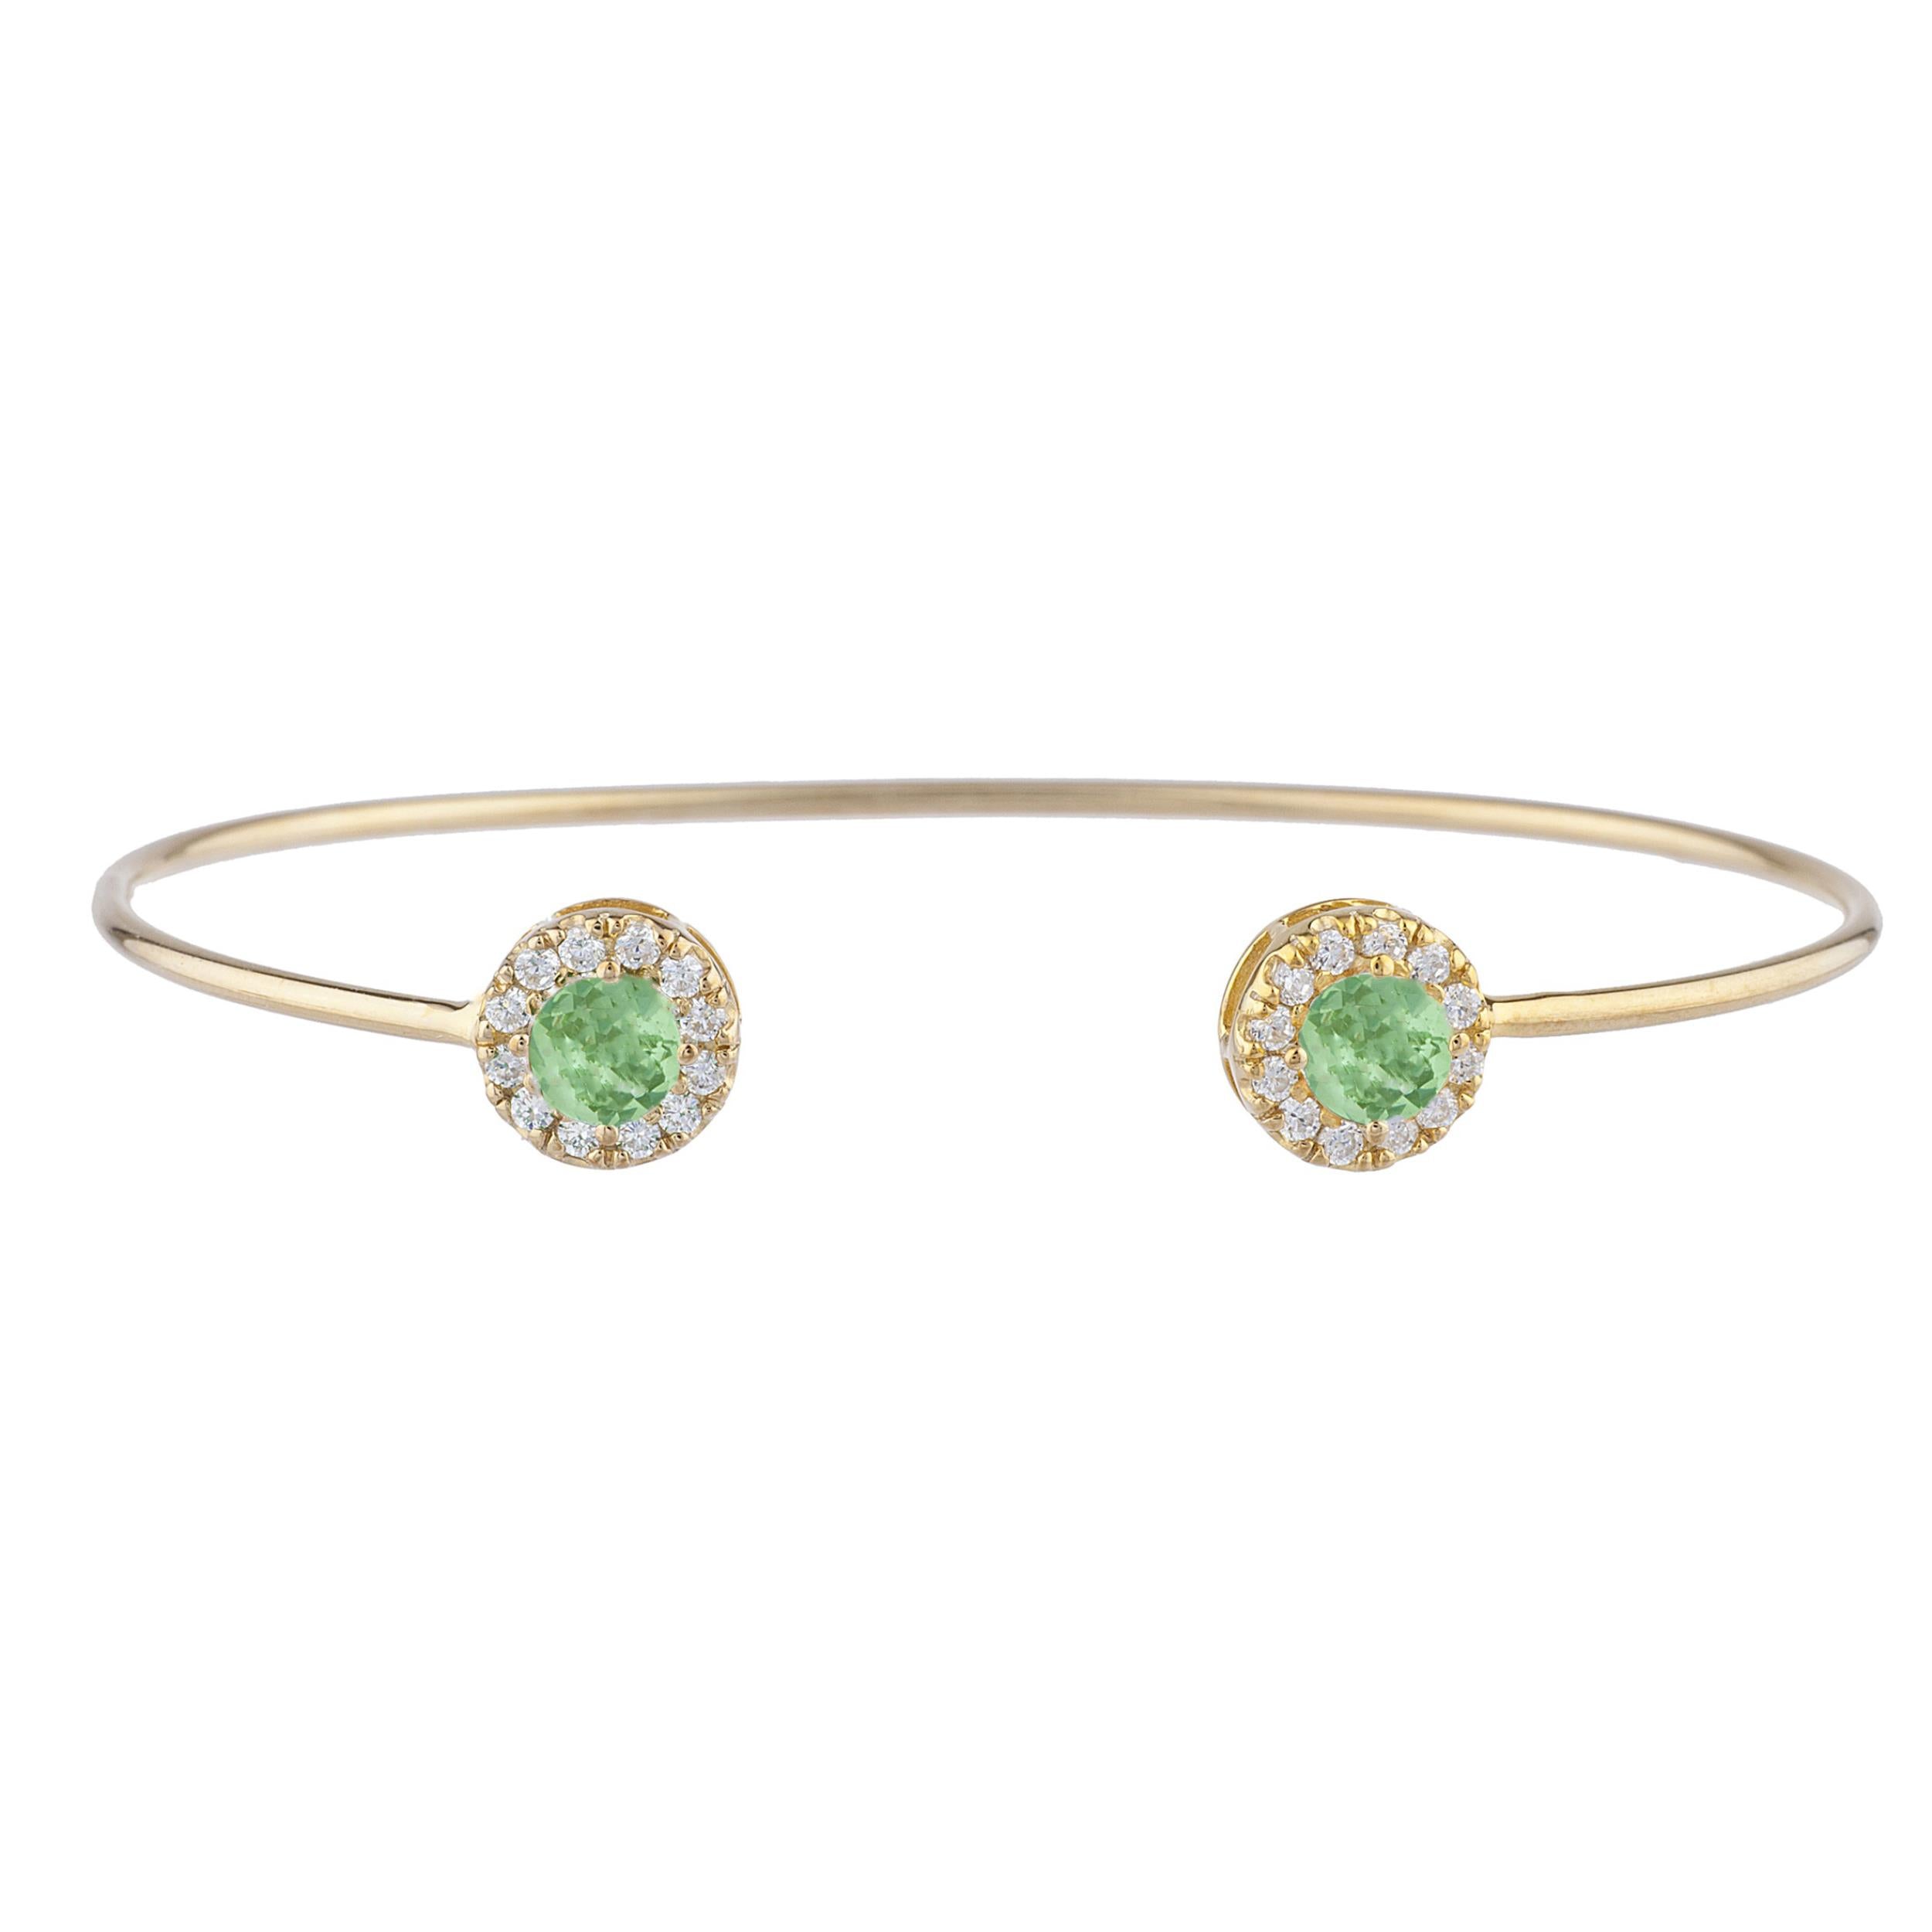 1 Ct Green Sapphire Halo Design Round Bangle Bracelet 14Kt Yellow Gold Rose Gold Silver